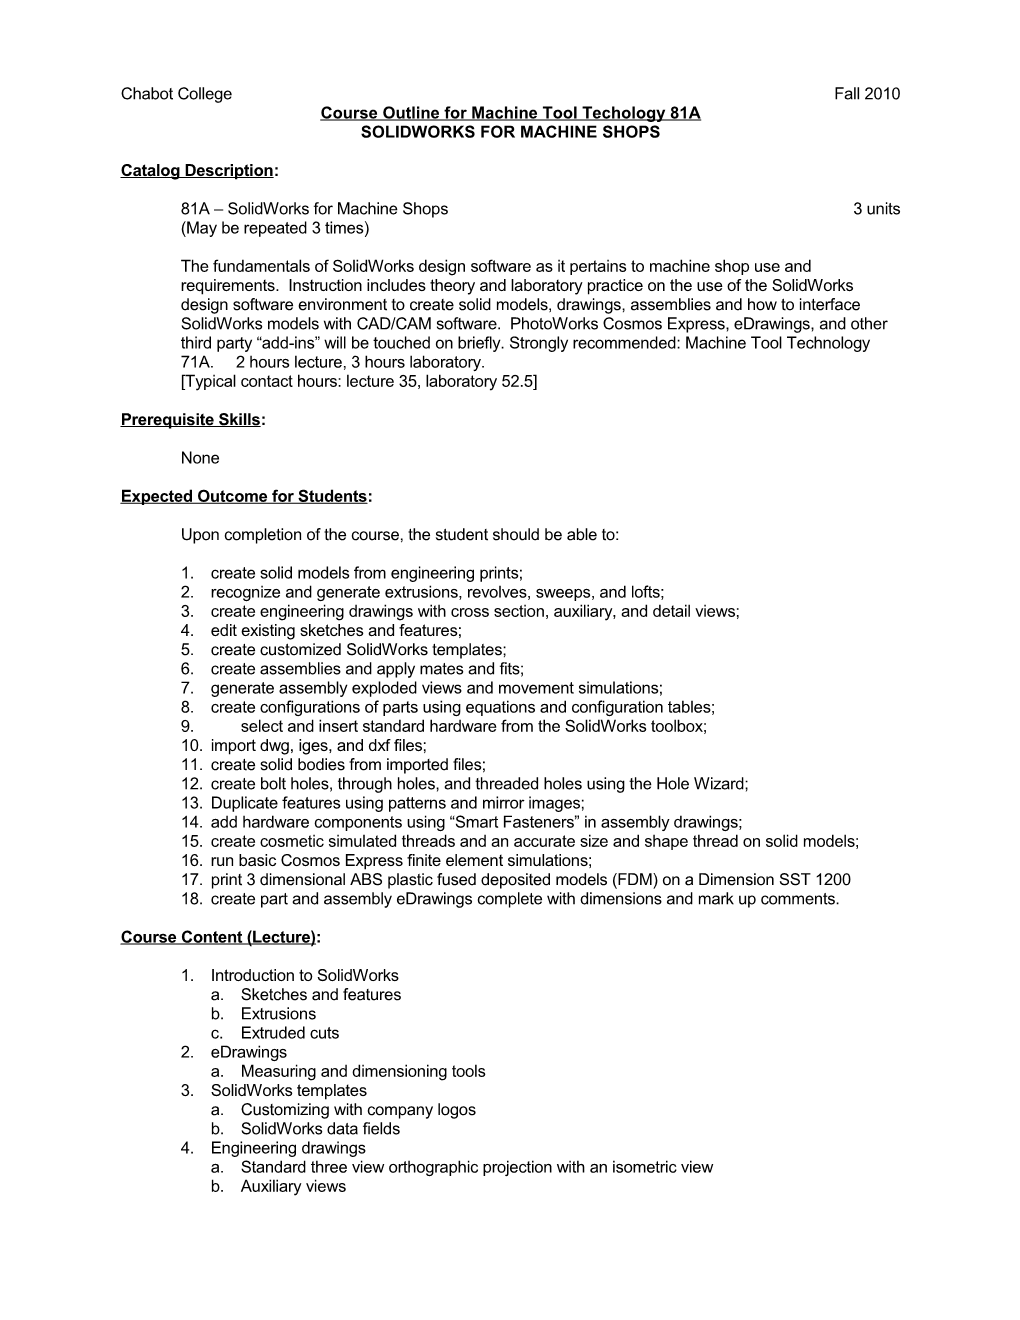 Course Outline for Machine Tool Technology 81A - Page 3